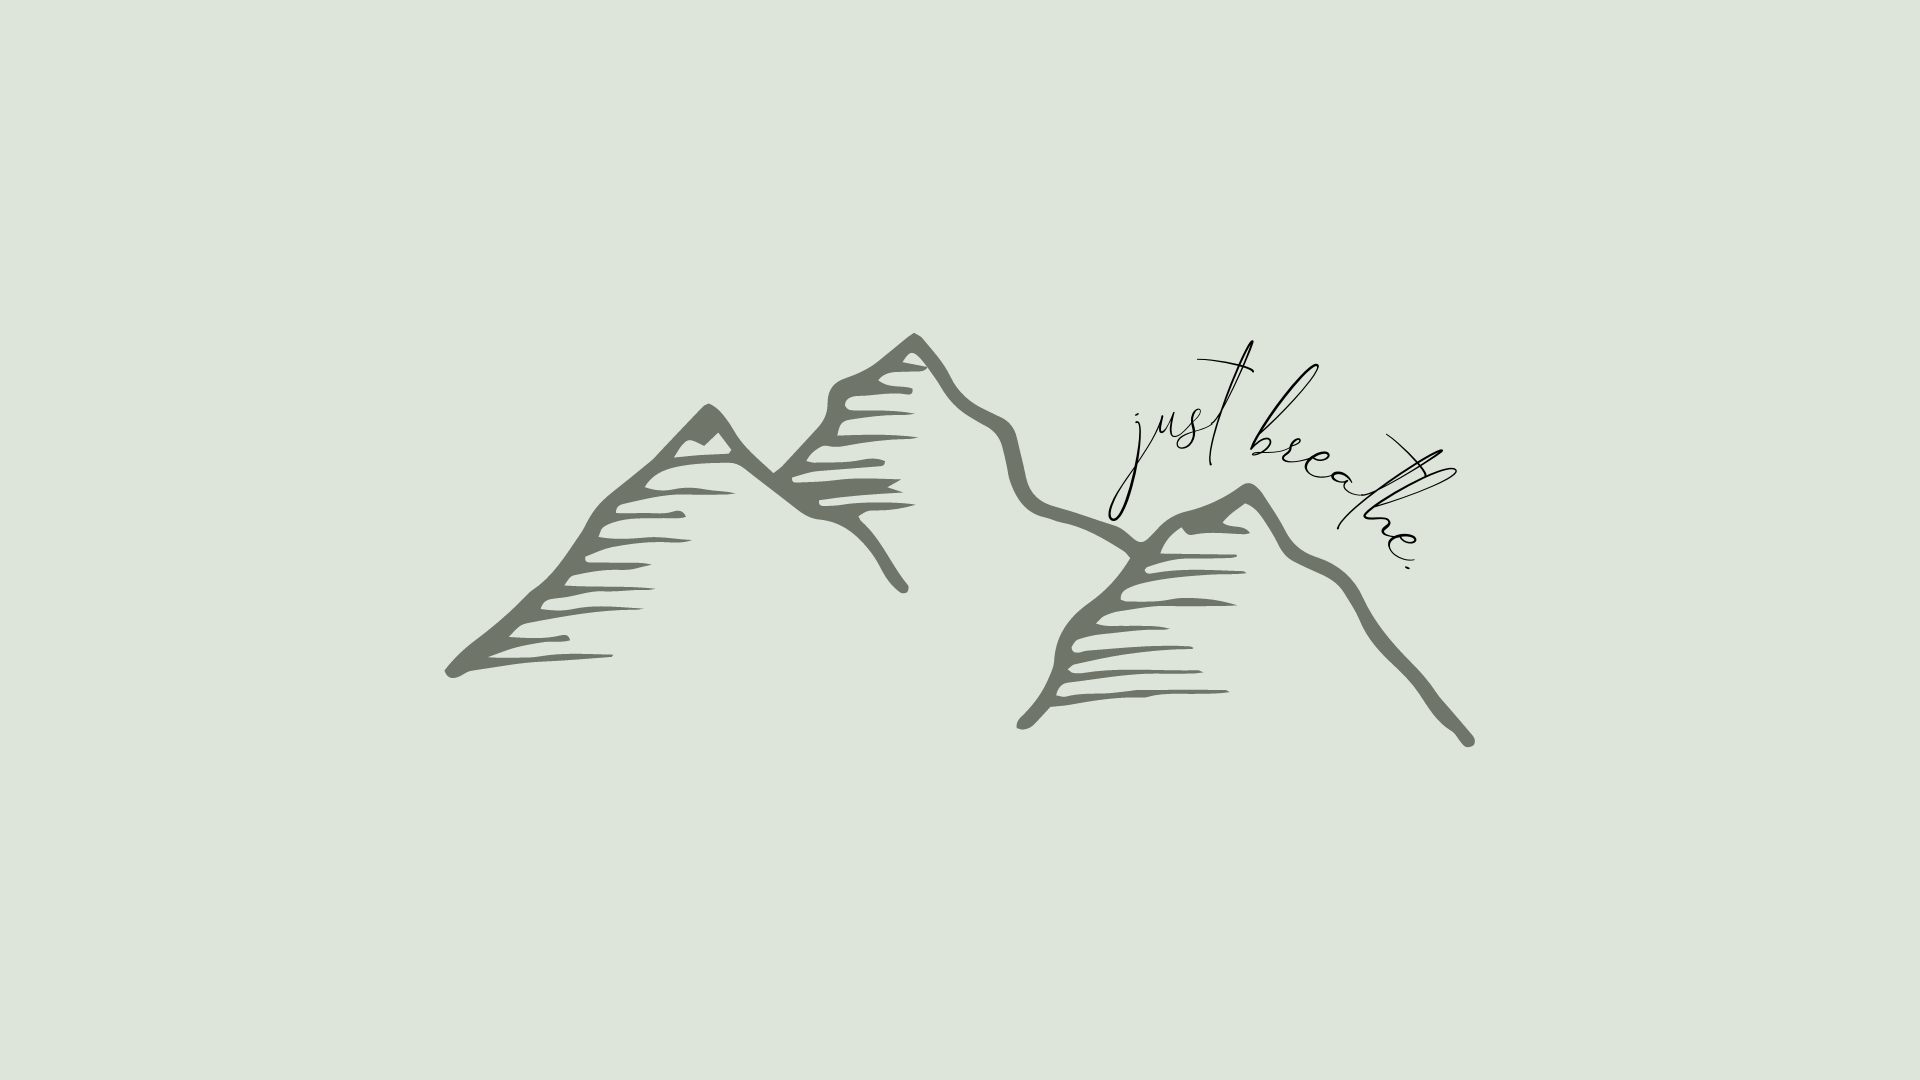 A simple illustration of three mountains with the words 